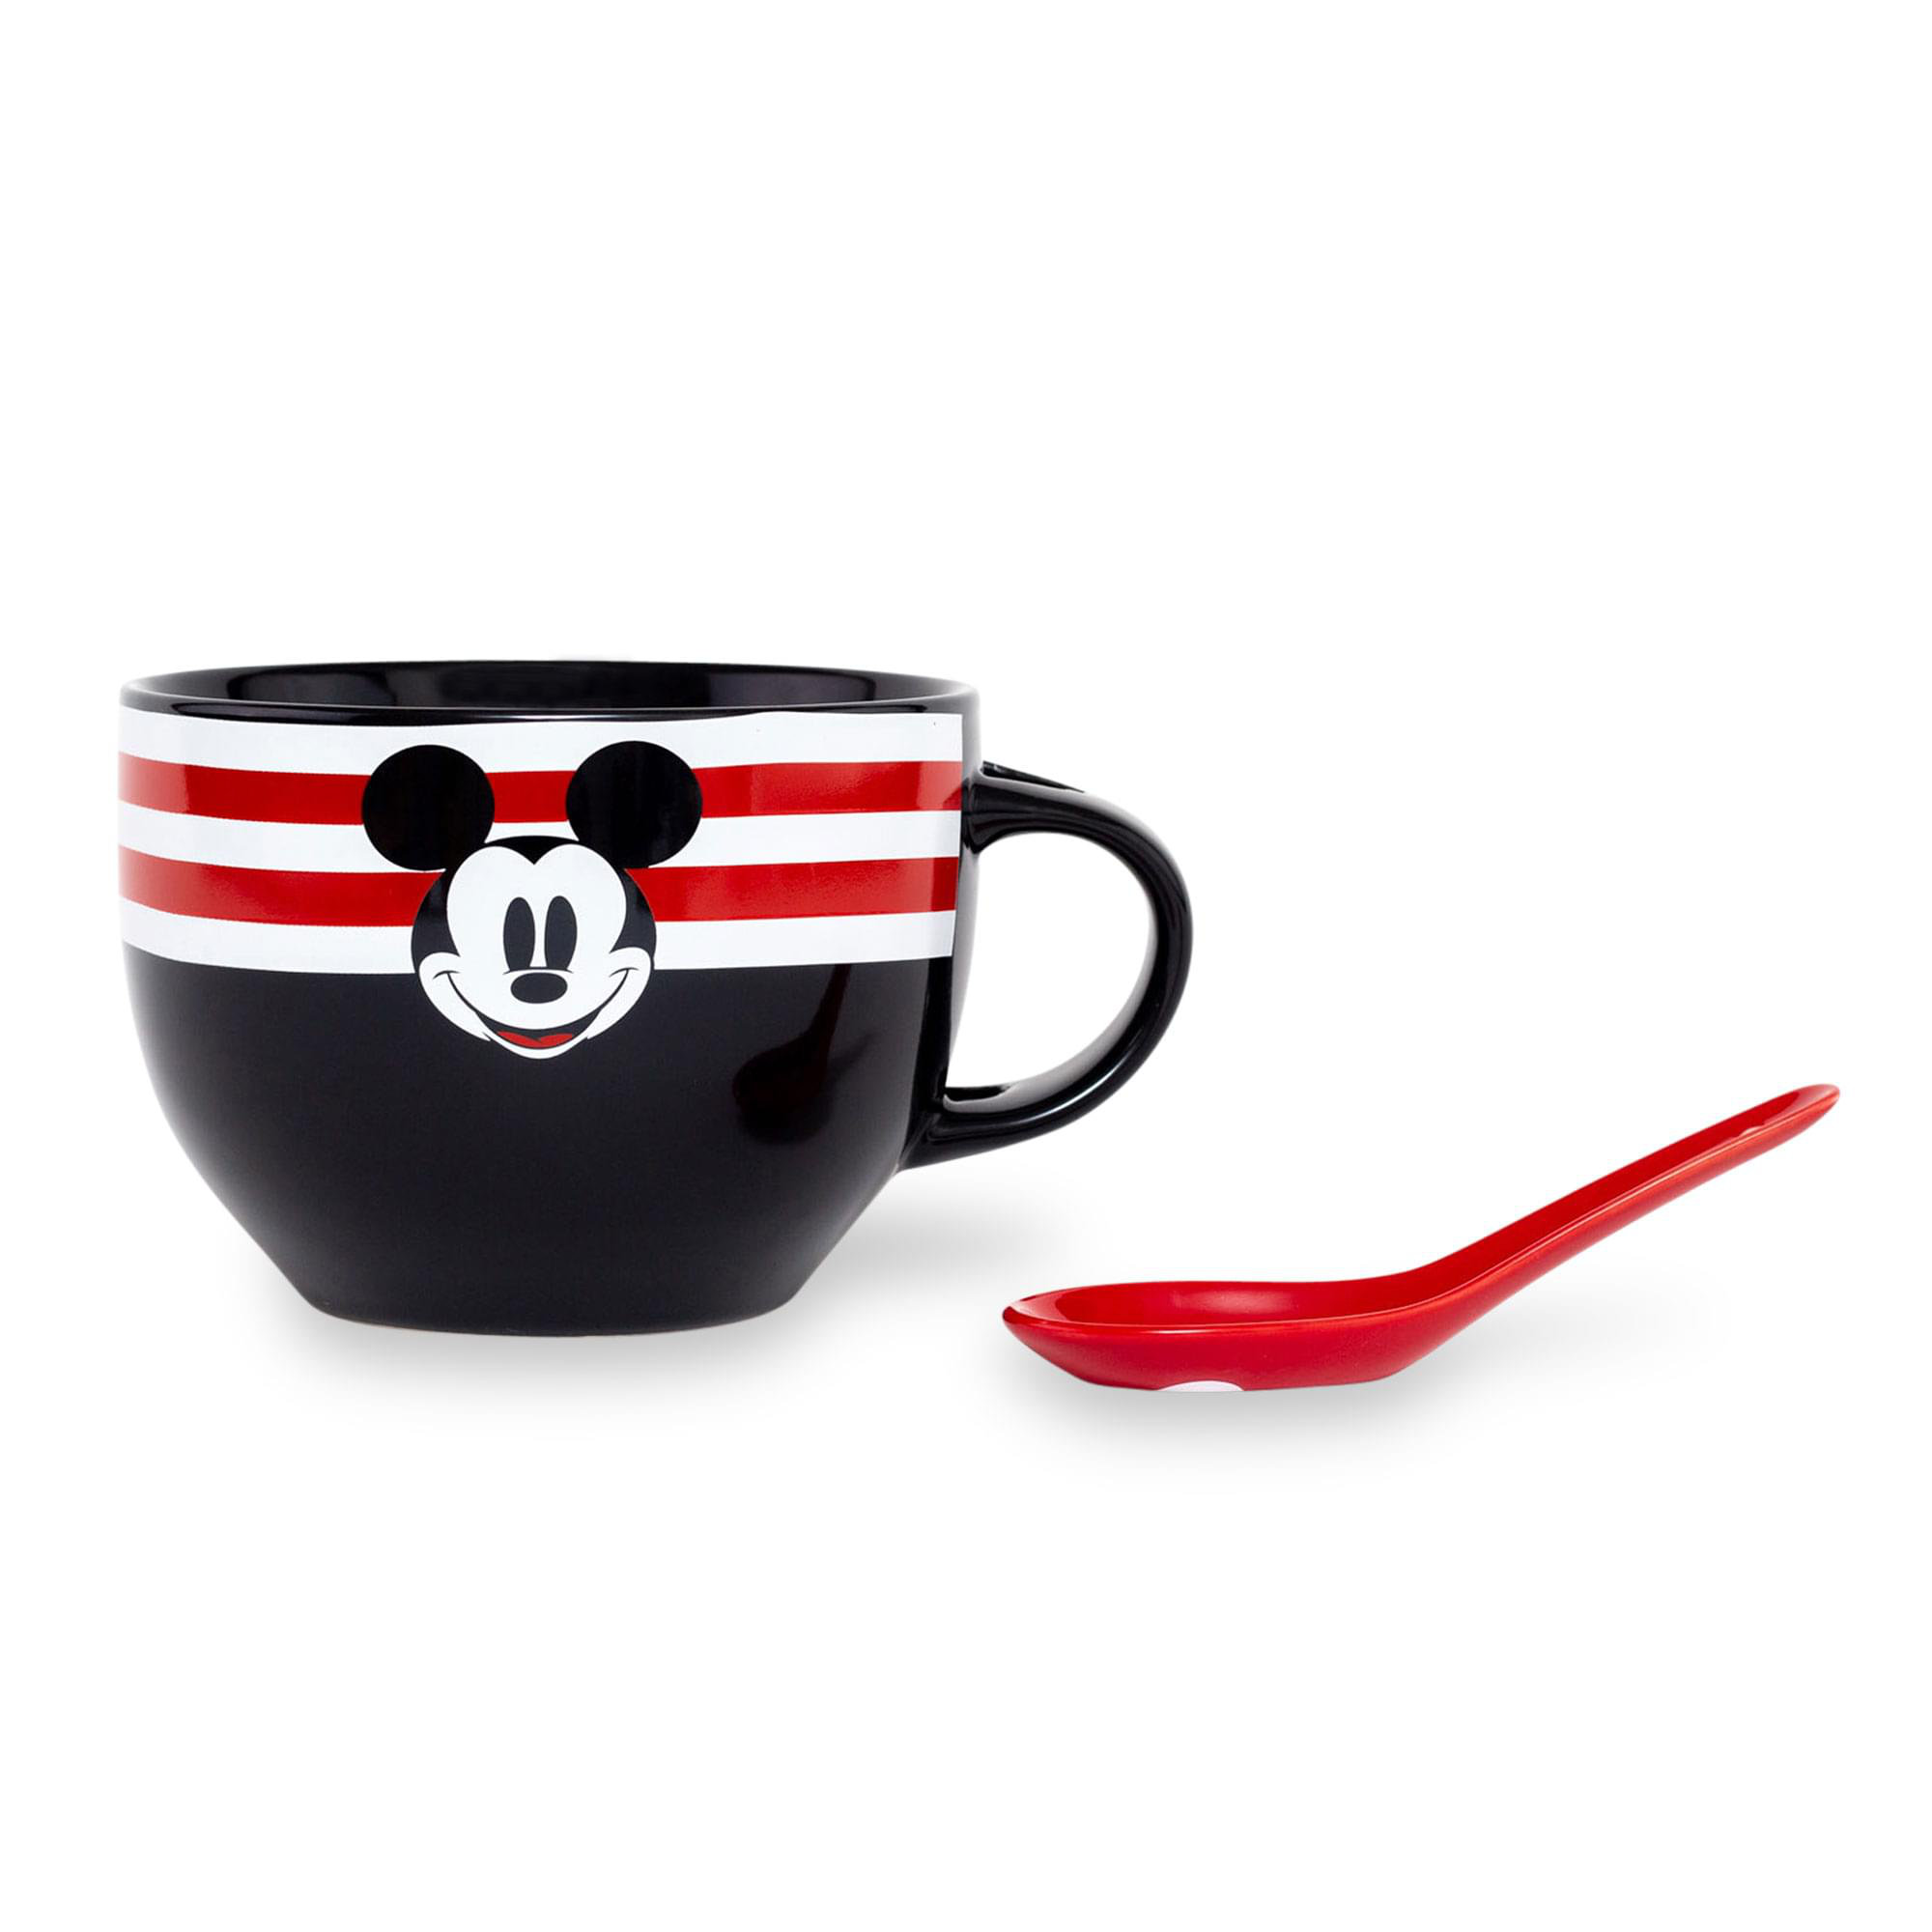 Disney 3 Mickey's Espresso Cup with Spoon - Disney Gifts